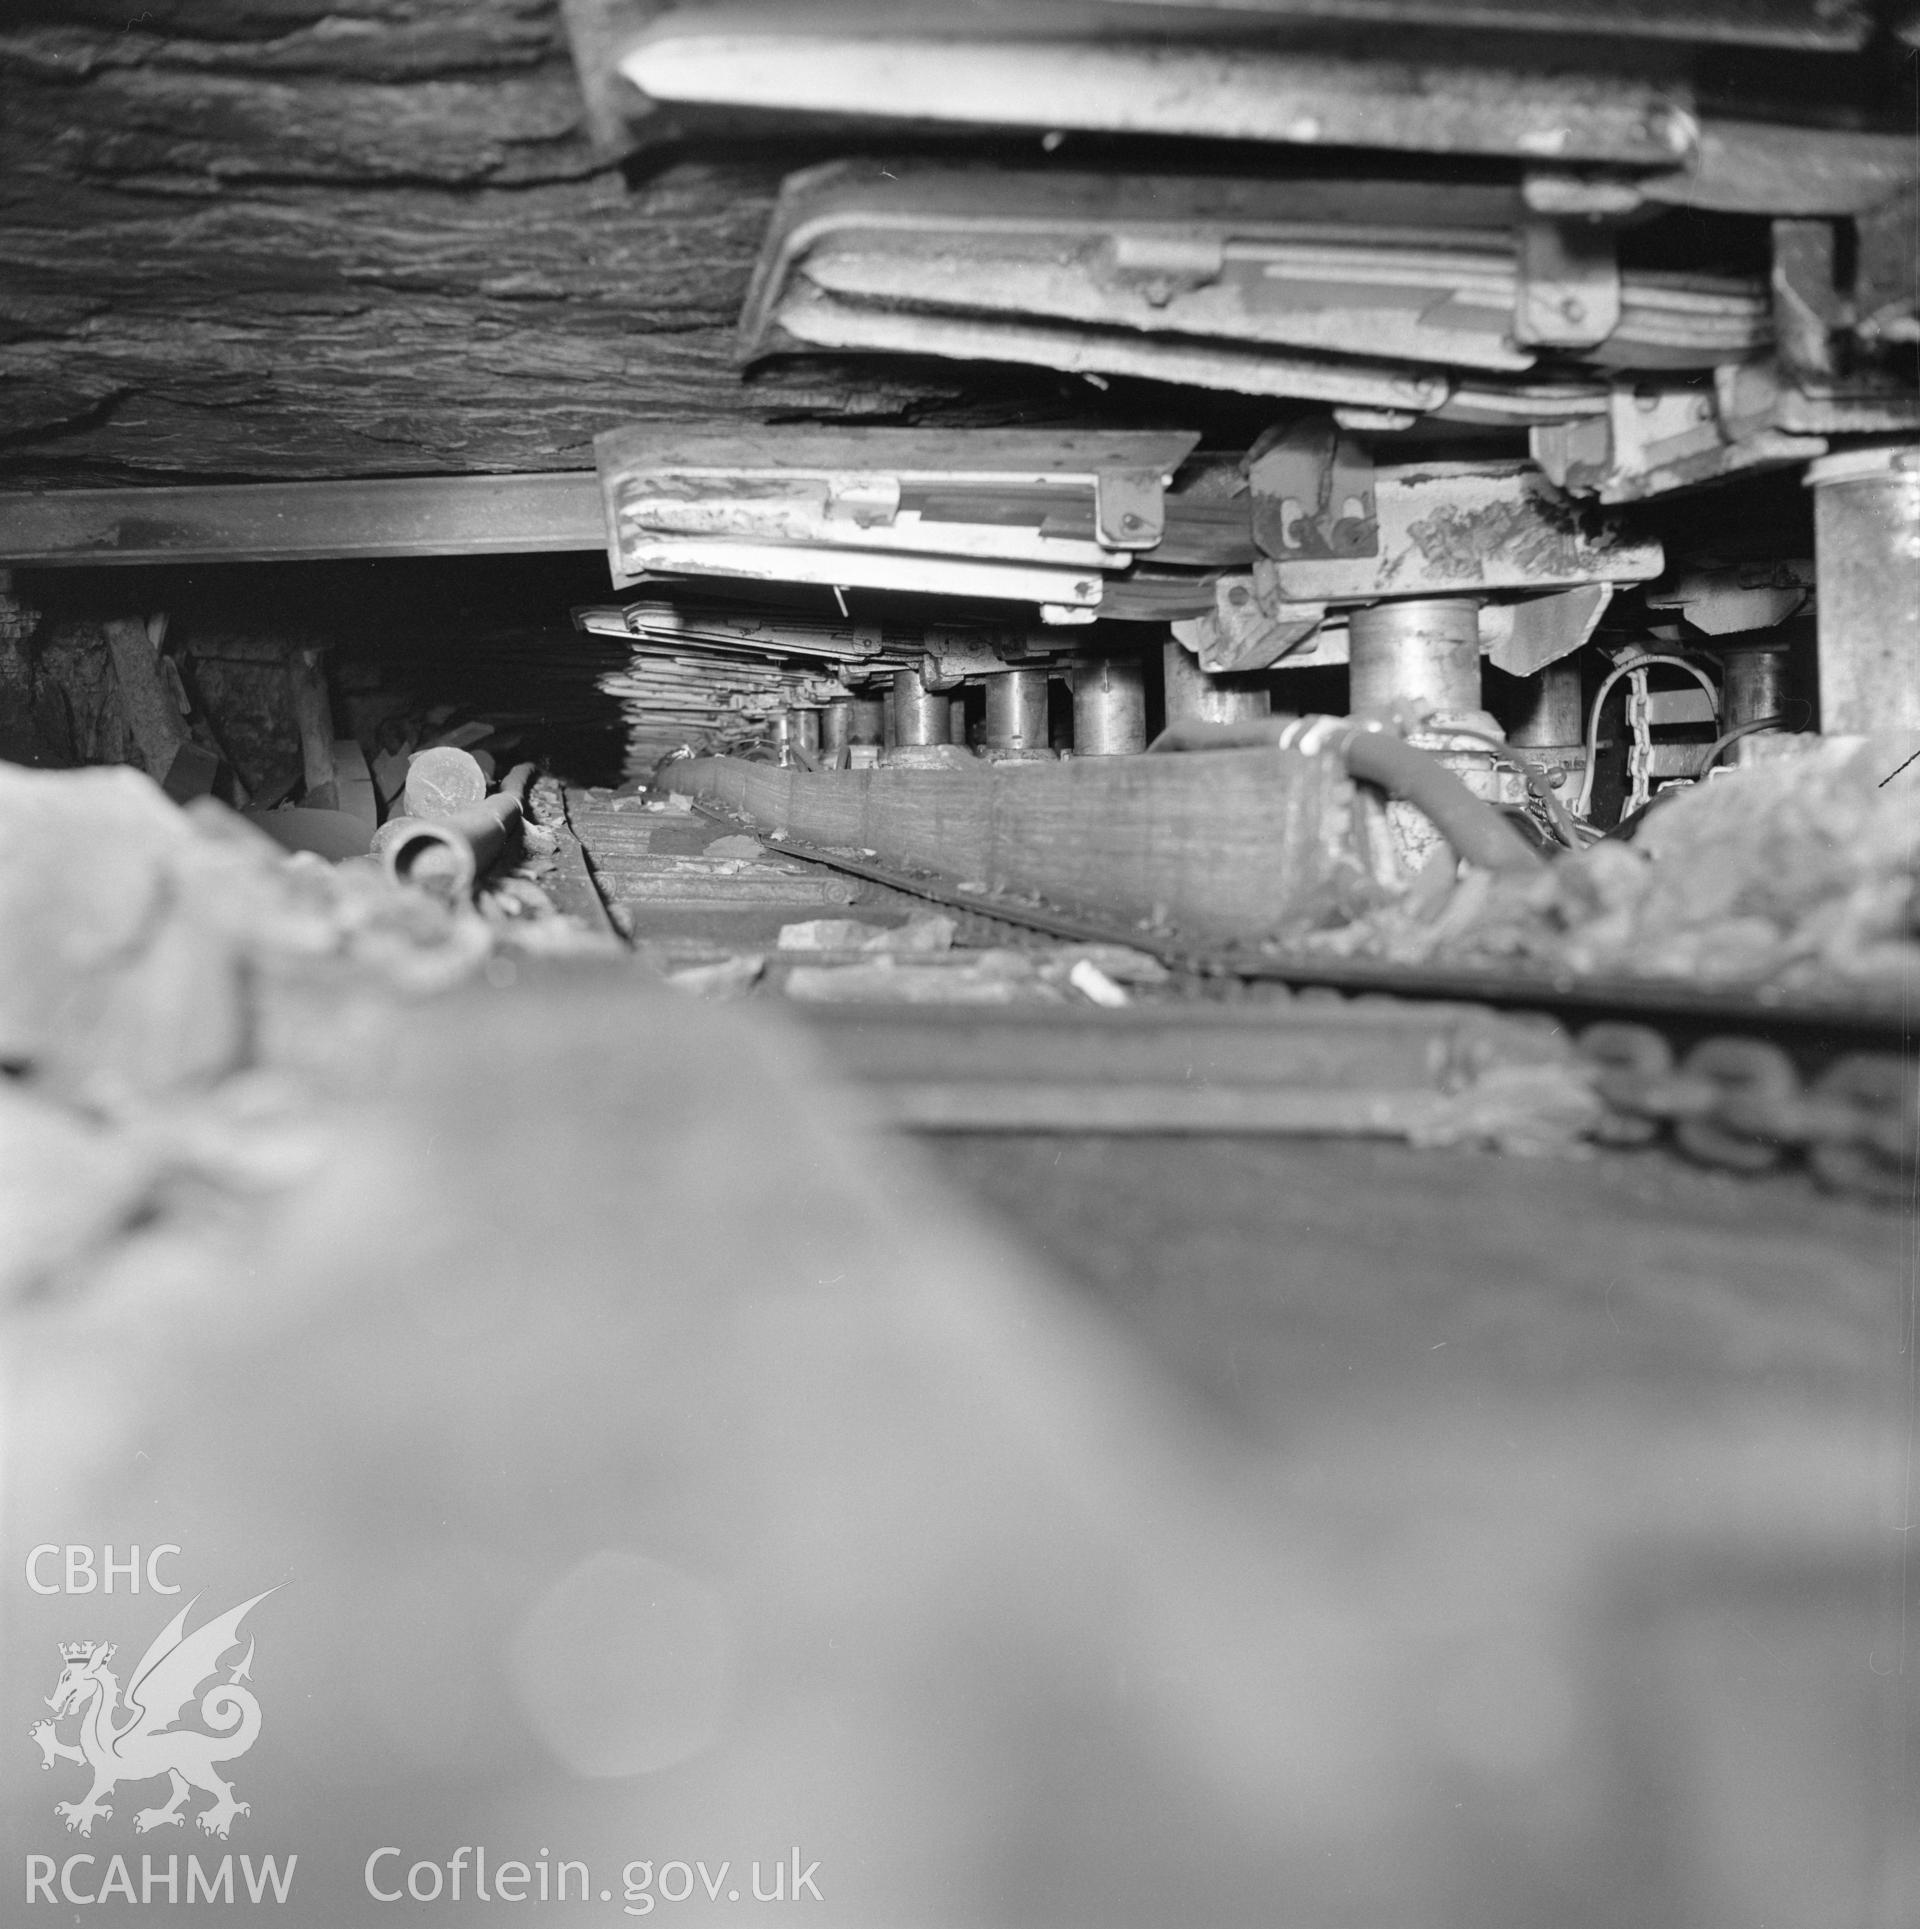 Digital copy of an acetate negative showing Blaenserchan Colliery - Coal face with Dowty chocks, from the John Cornwell Collection.